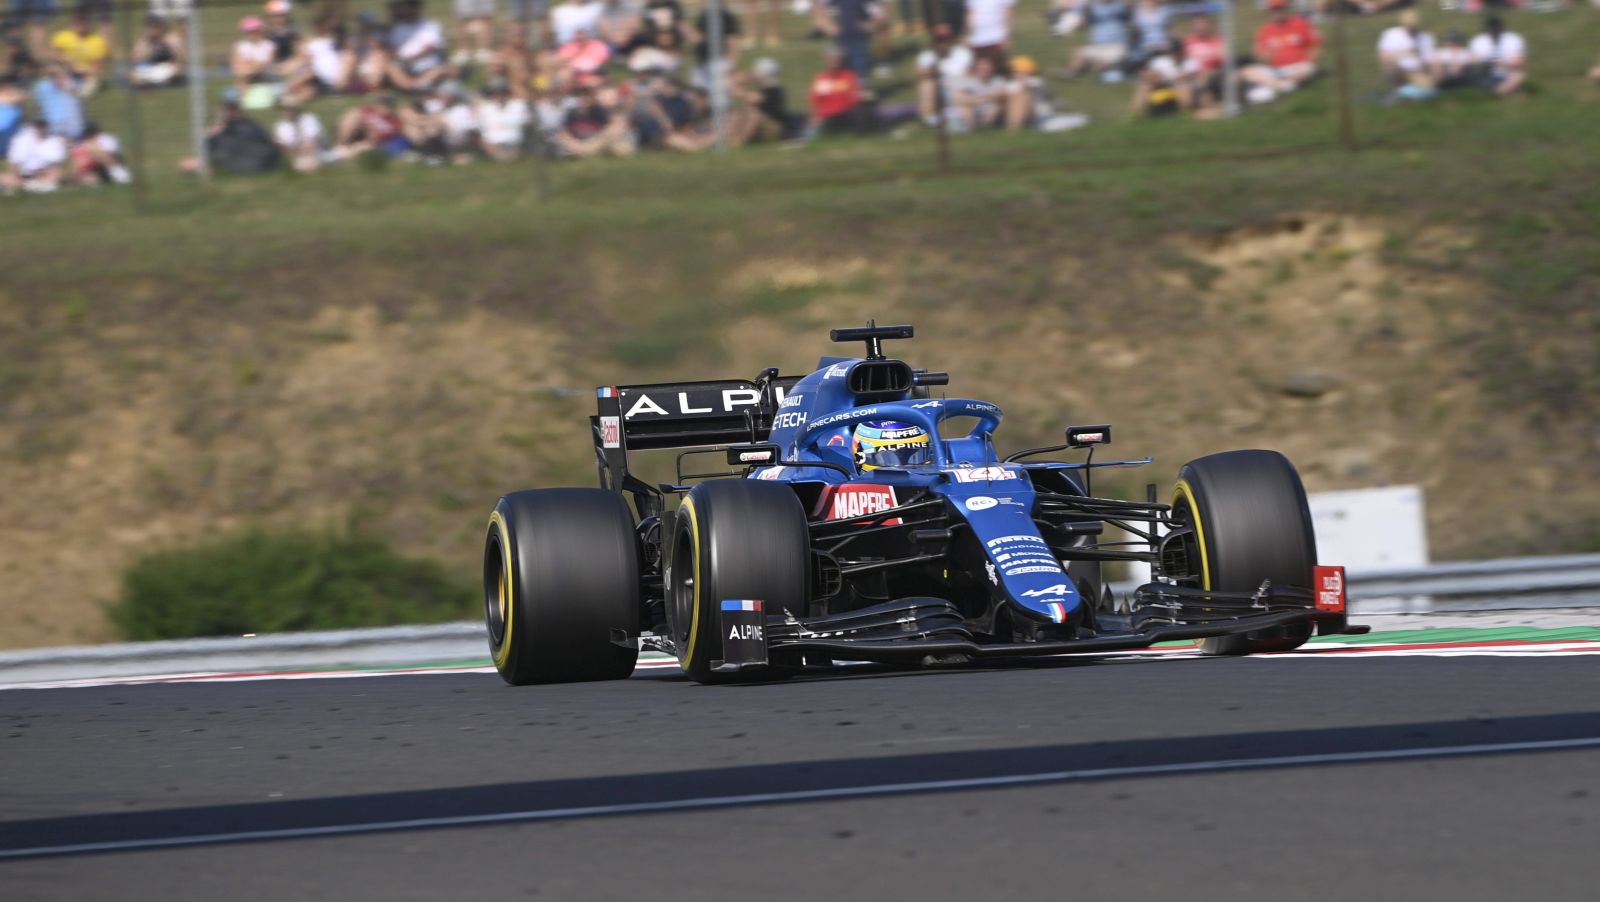 epa09386022 Spanish Formula One driver Fernando Alonso of the Alpine F1 Team in action during the Formula One Grand Prix of Hungary at the Hungaroring circuit in Mogyorod, near Budapest, Hungary, 01 August 2021.  EPA/Zoltan Balogh HUNGARY OUT